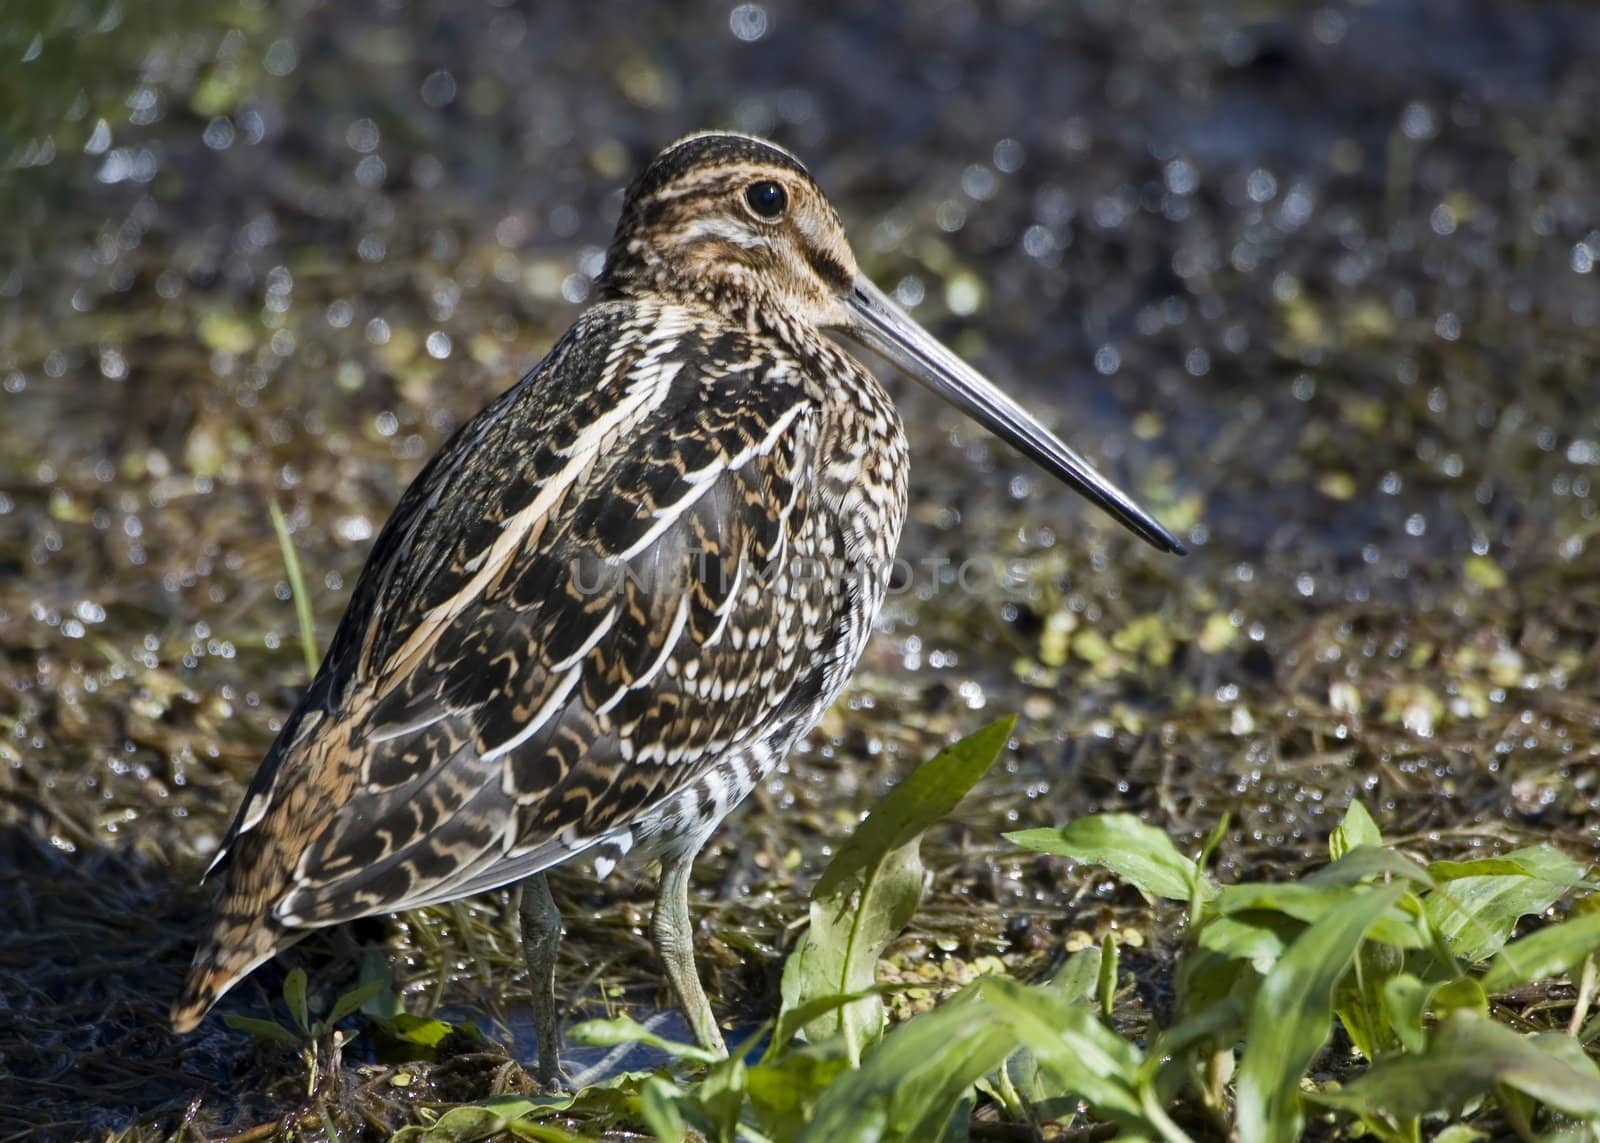 Common snipe perched on the ground.